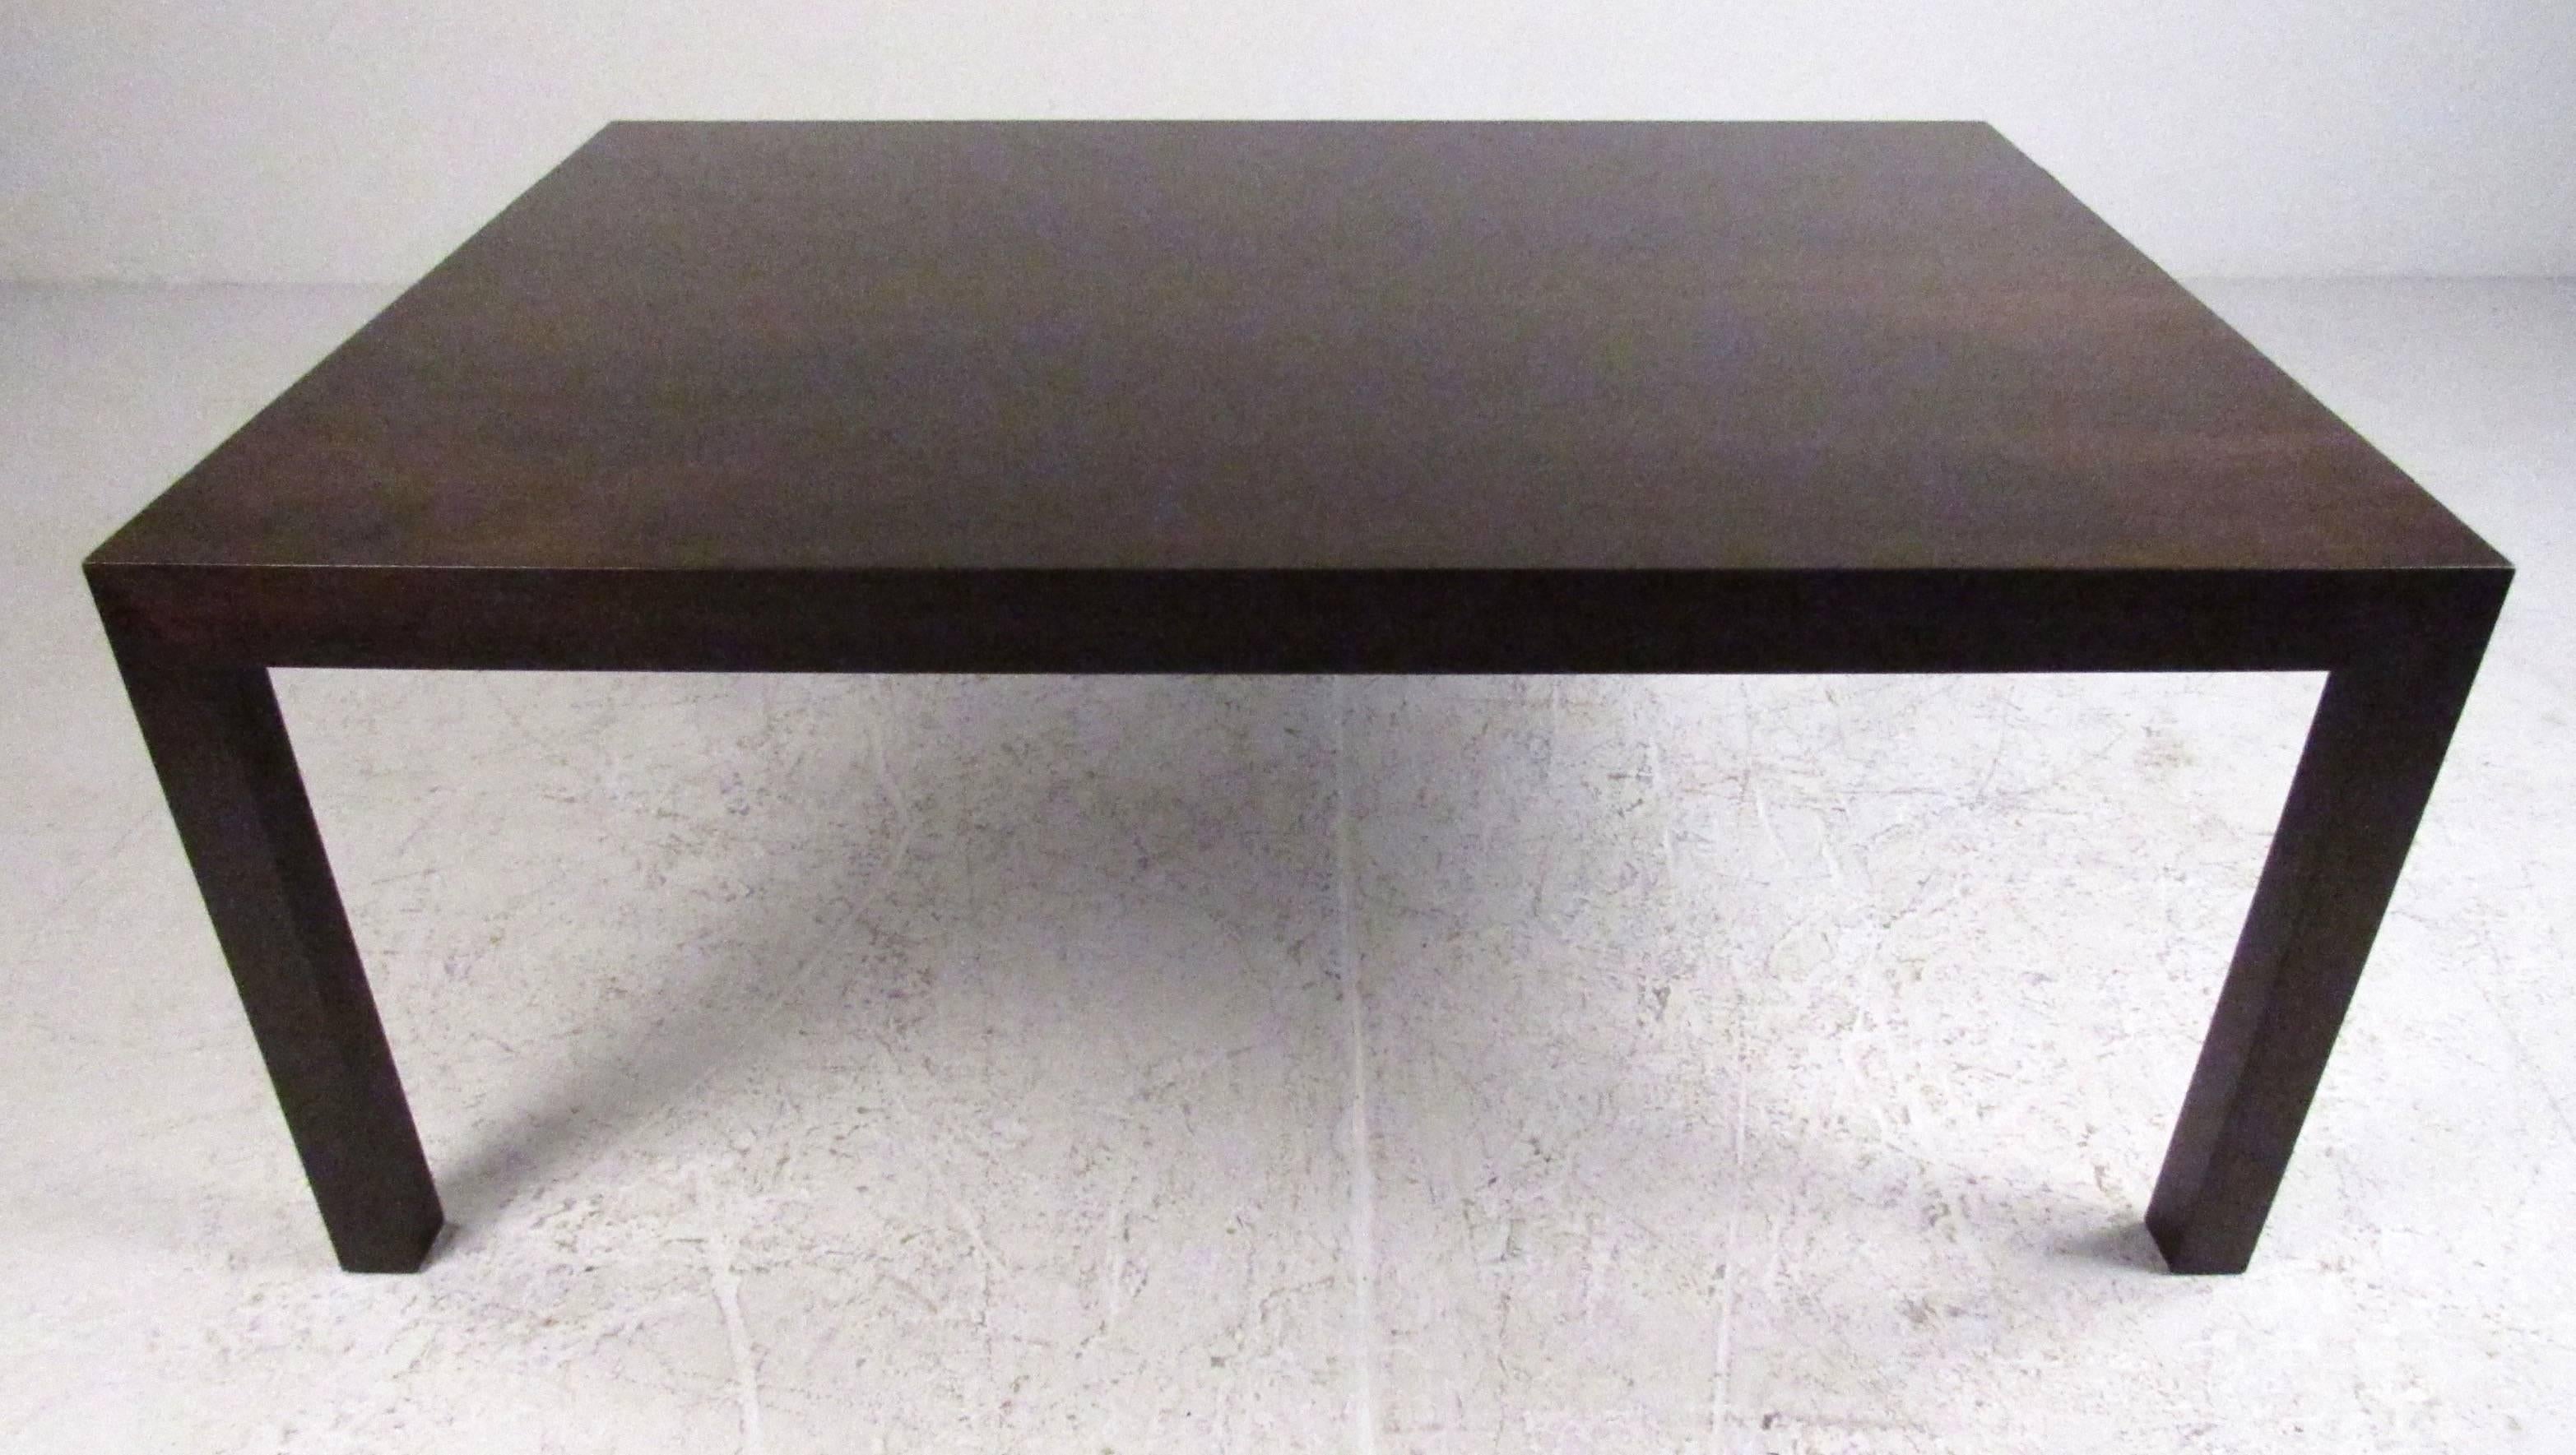 Classic, Minimalist style, Parsons table in walnut designed by Edward Wormley for Dunbar, circa 1960s. Please confirm item location (NY or NJ) with dealer.